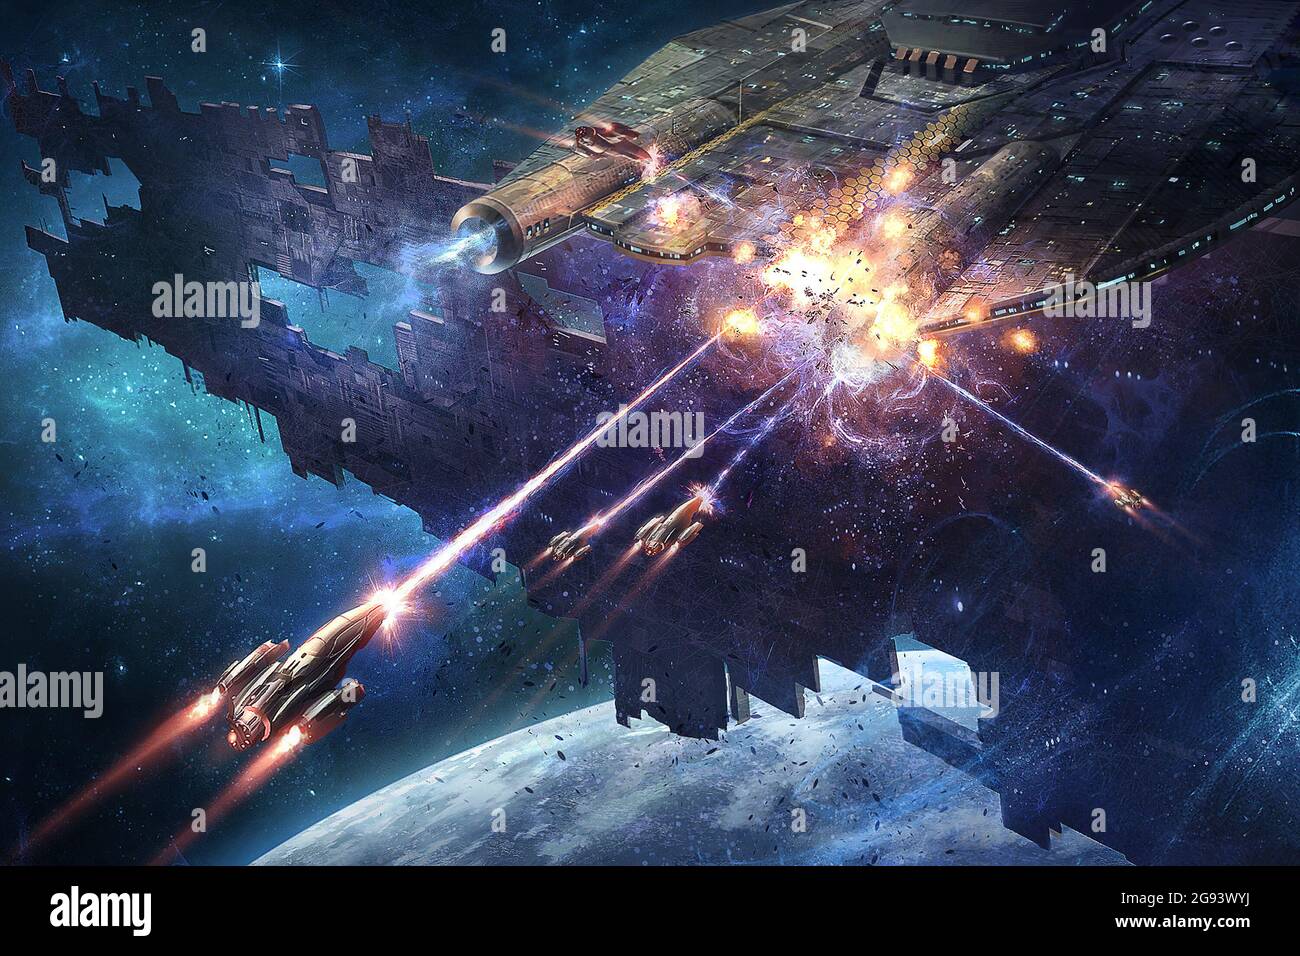 digital illustration of spacecrafts fight mother ship carrier in space universe Stock Photo